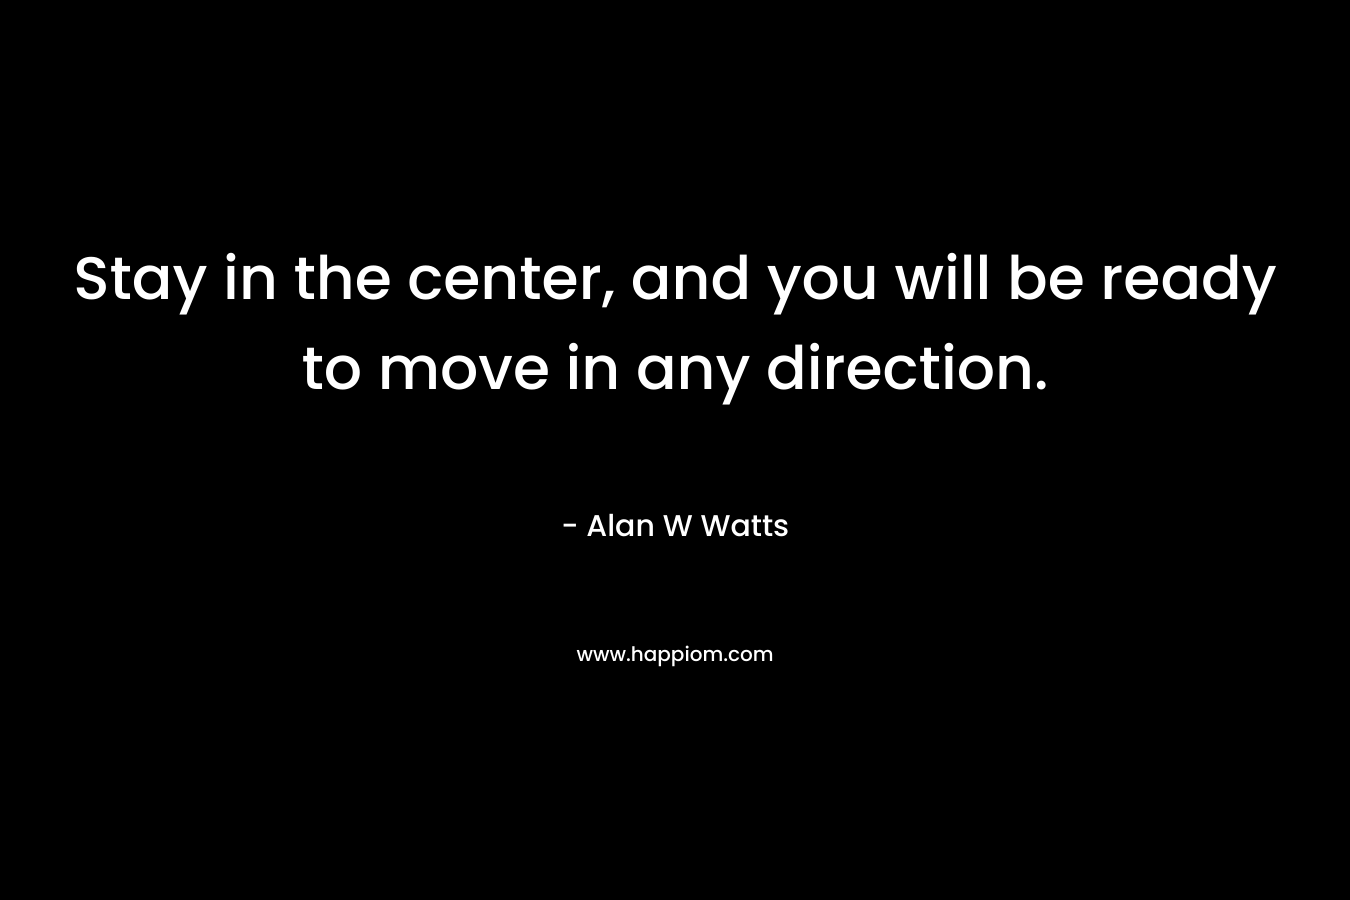 Stay in the center, and you will be ready to move in any direction.